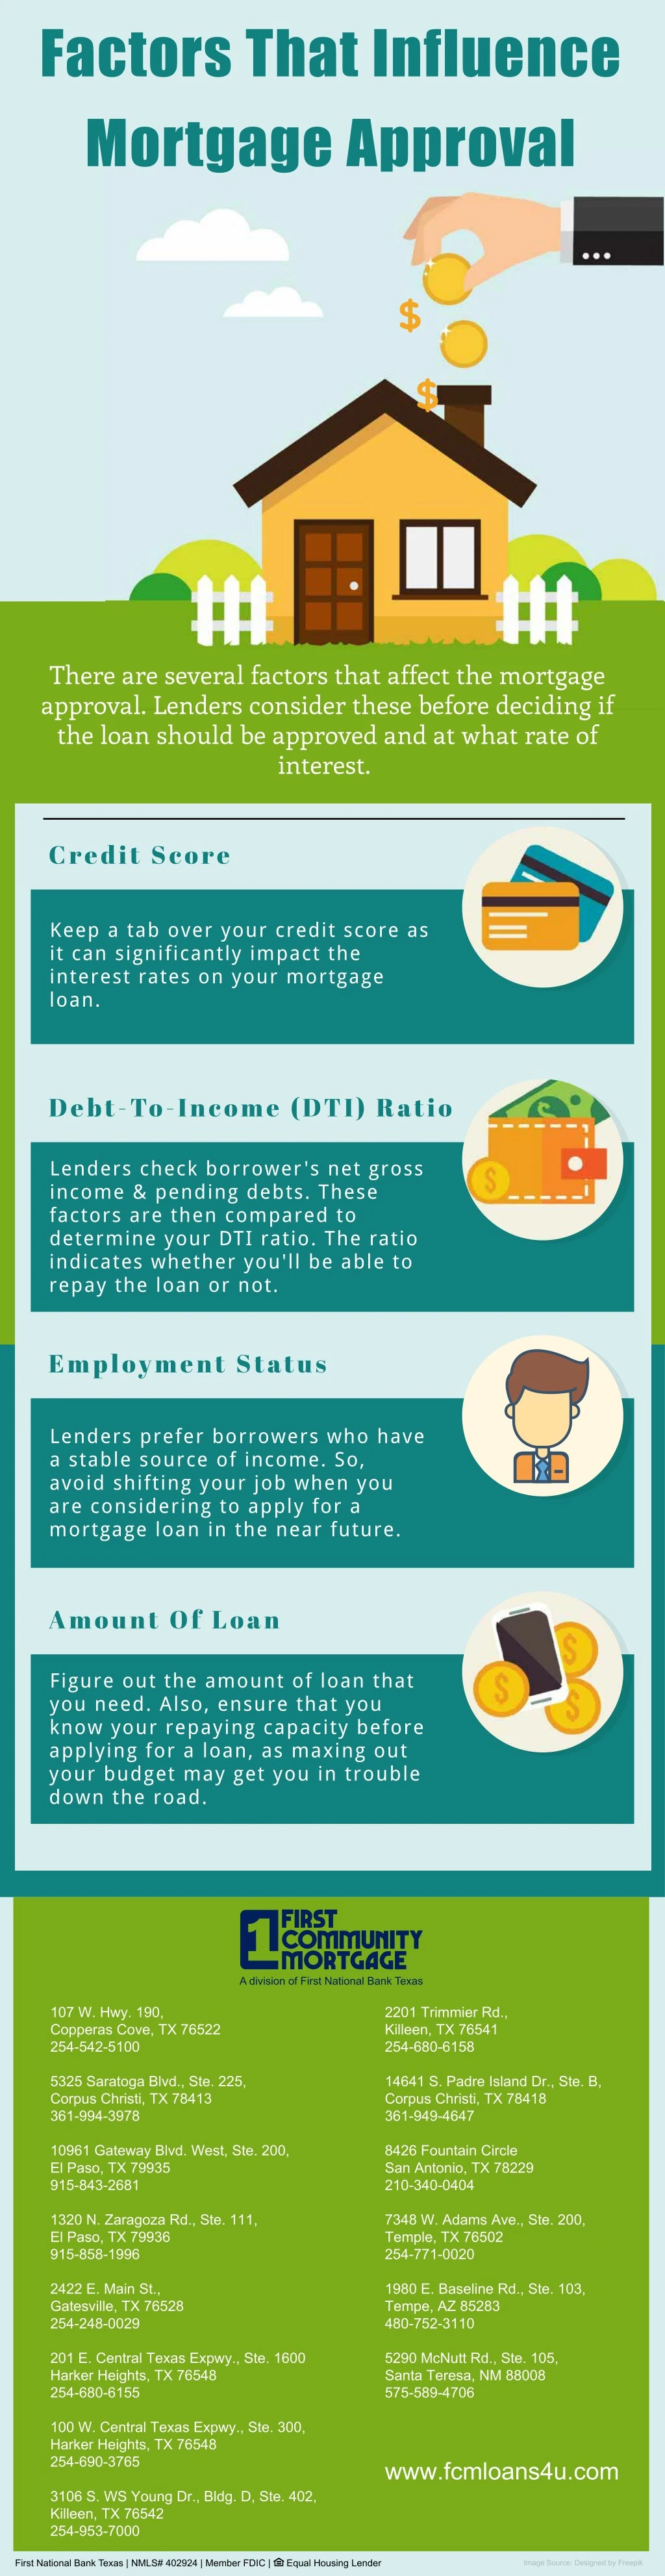 factors that influence mortgage approval